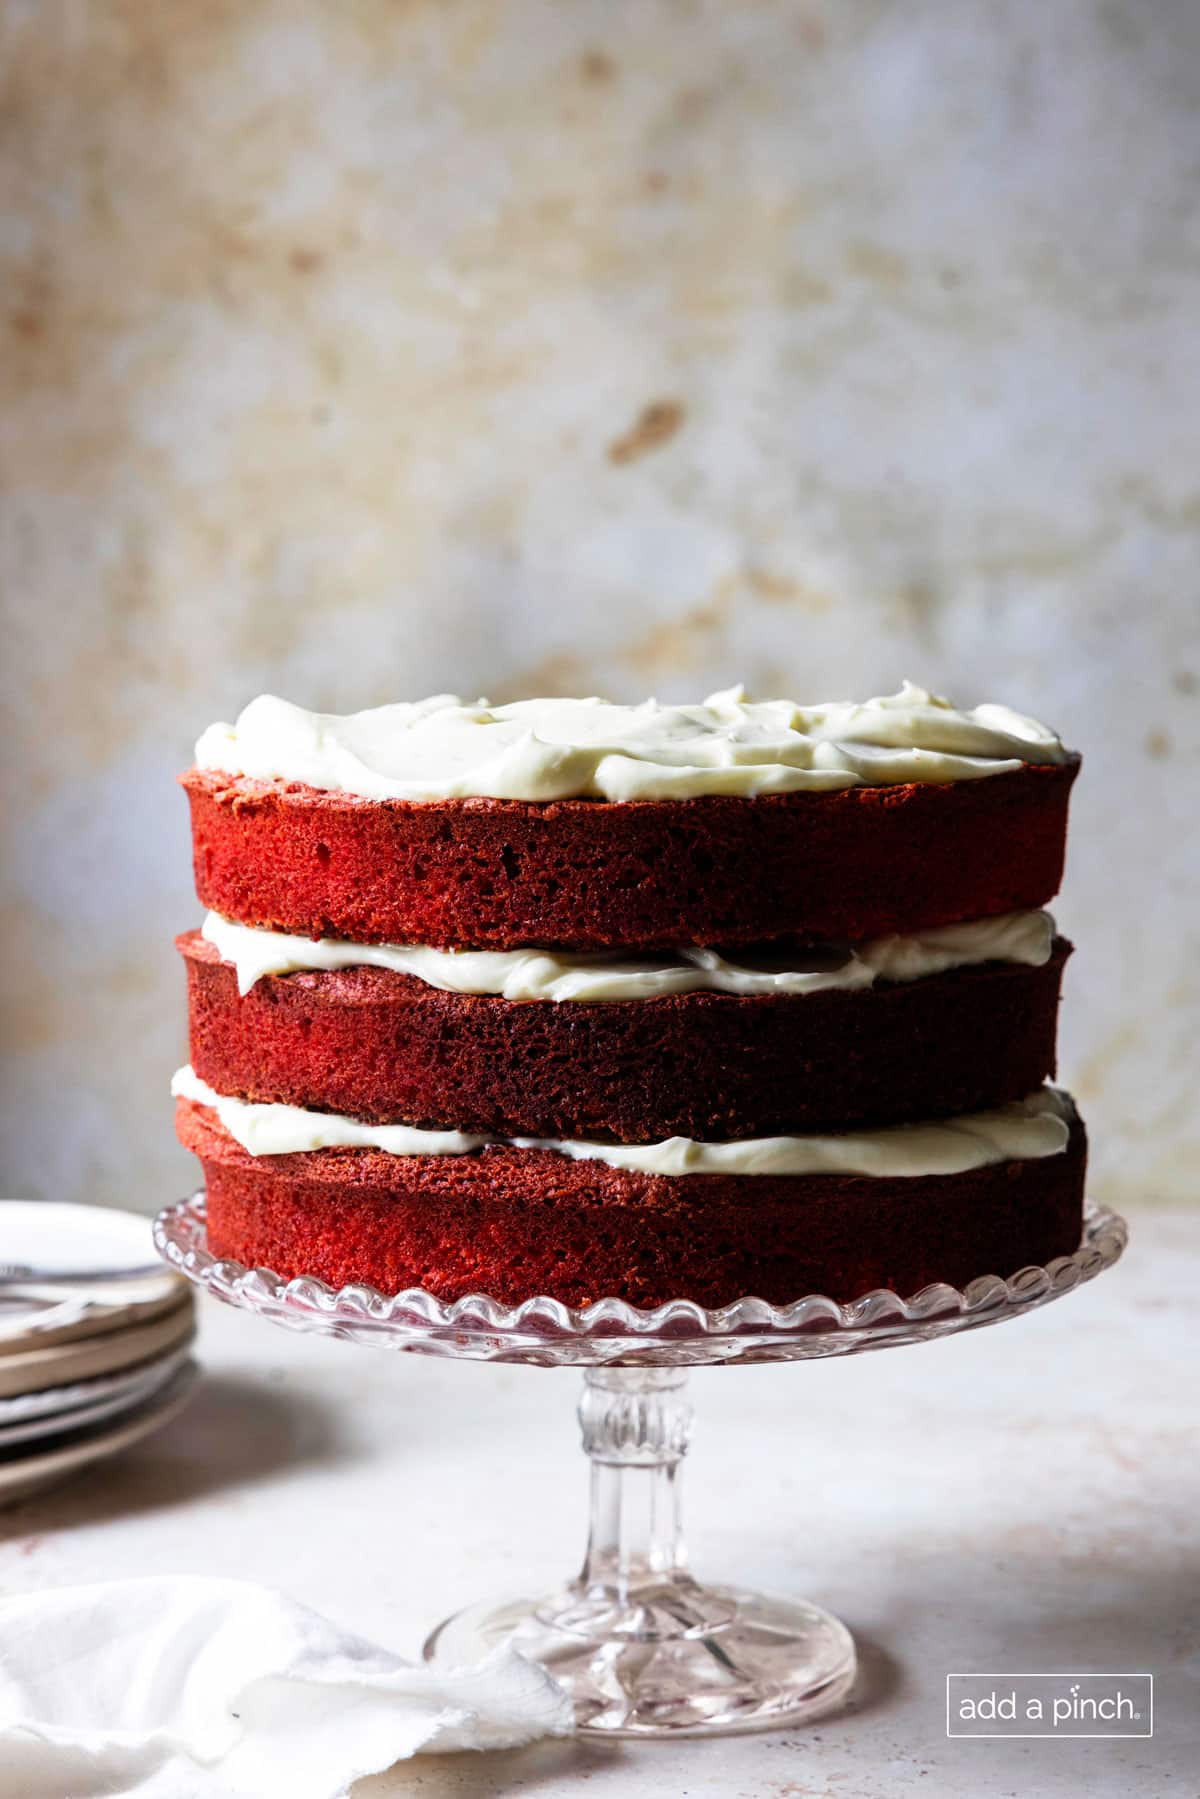 Photograph of three layered red velvet cake with white fluffy frosting in between the layers.